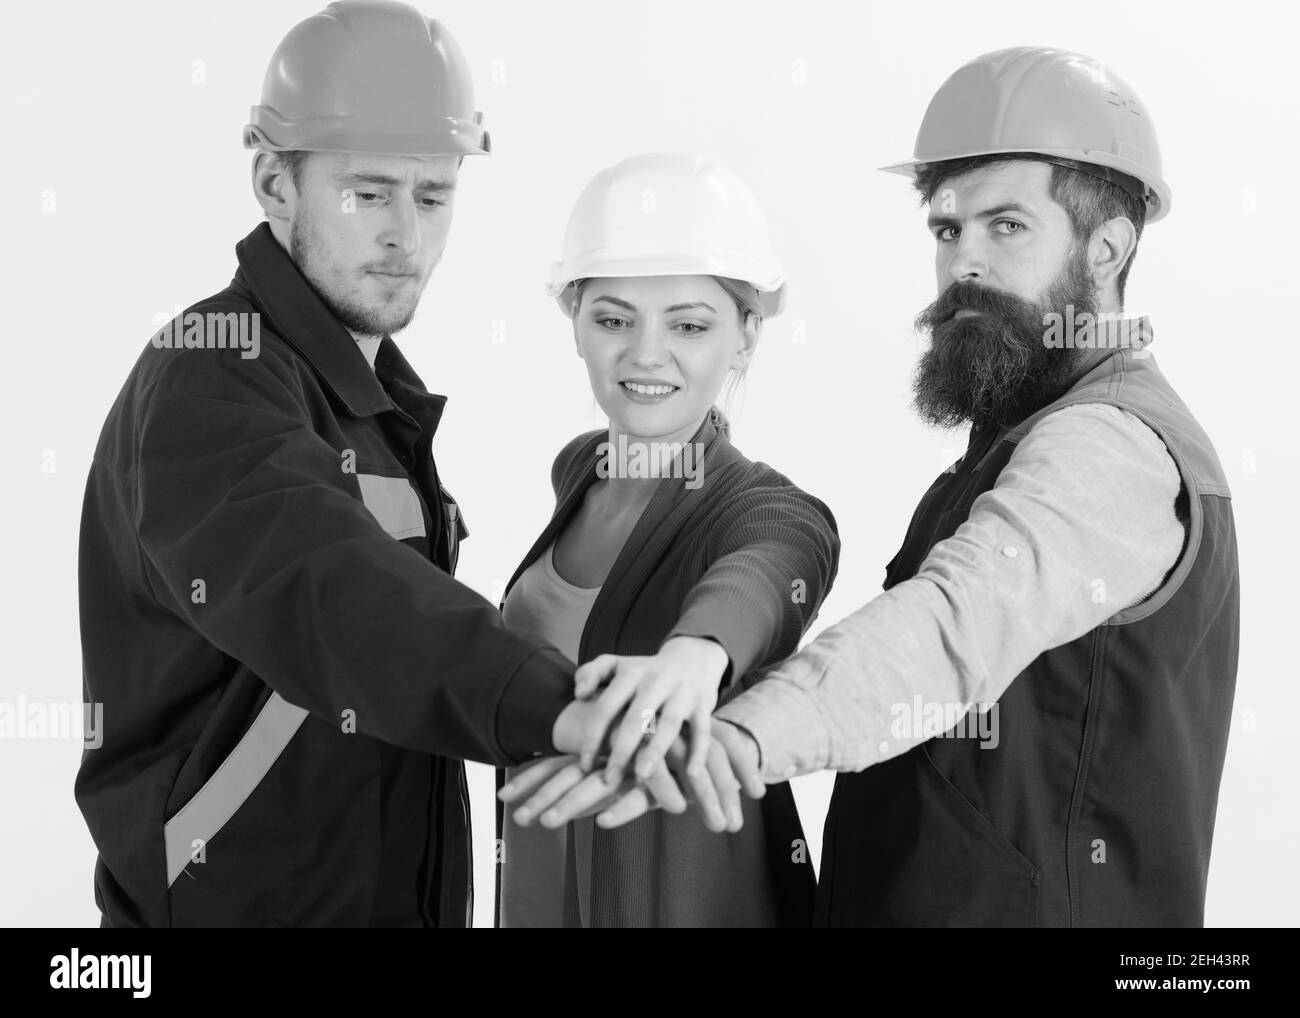 https://c8.alamy.com/comp/2EH43RR/woman-and-men-in-hard-hats-holds-hands-together-team-of-architects-builders-ready-to-work-isolated-white-background-teambuilding-concept-builder-engineer-labourer-repairman-as-friendly-team-2EH43RR.jpg